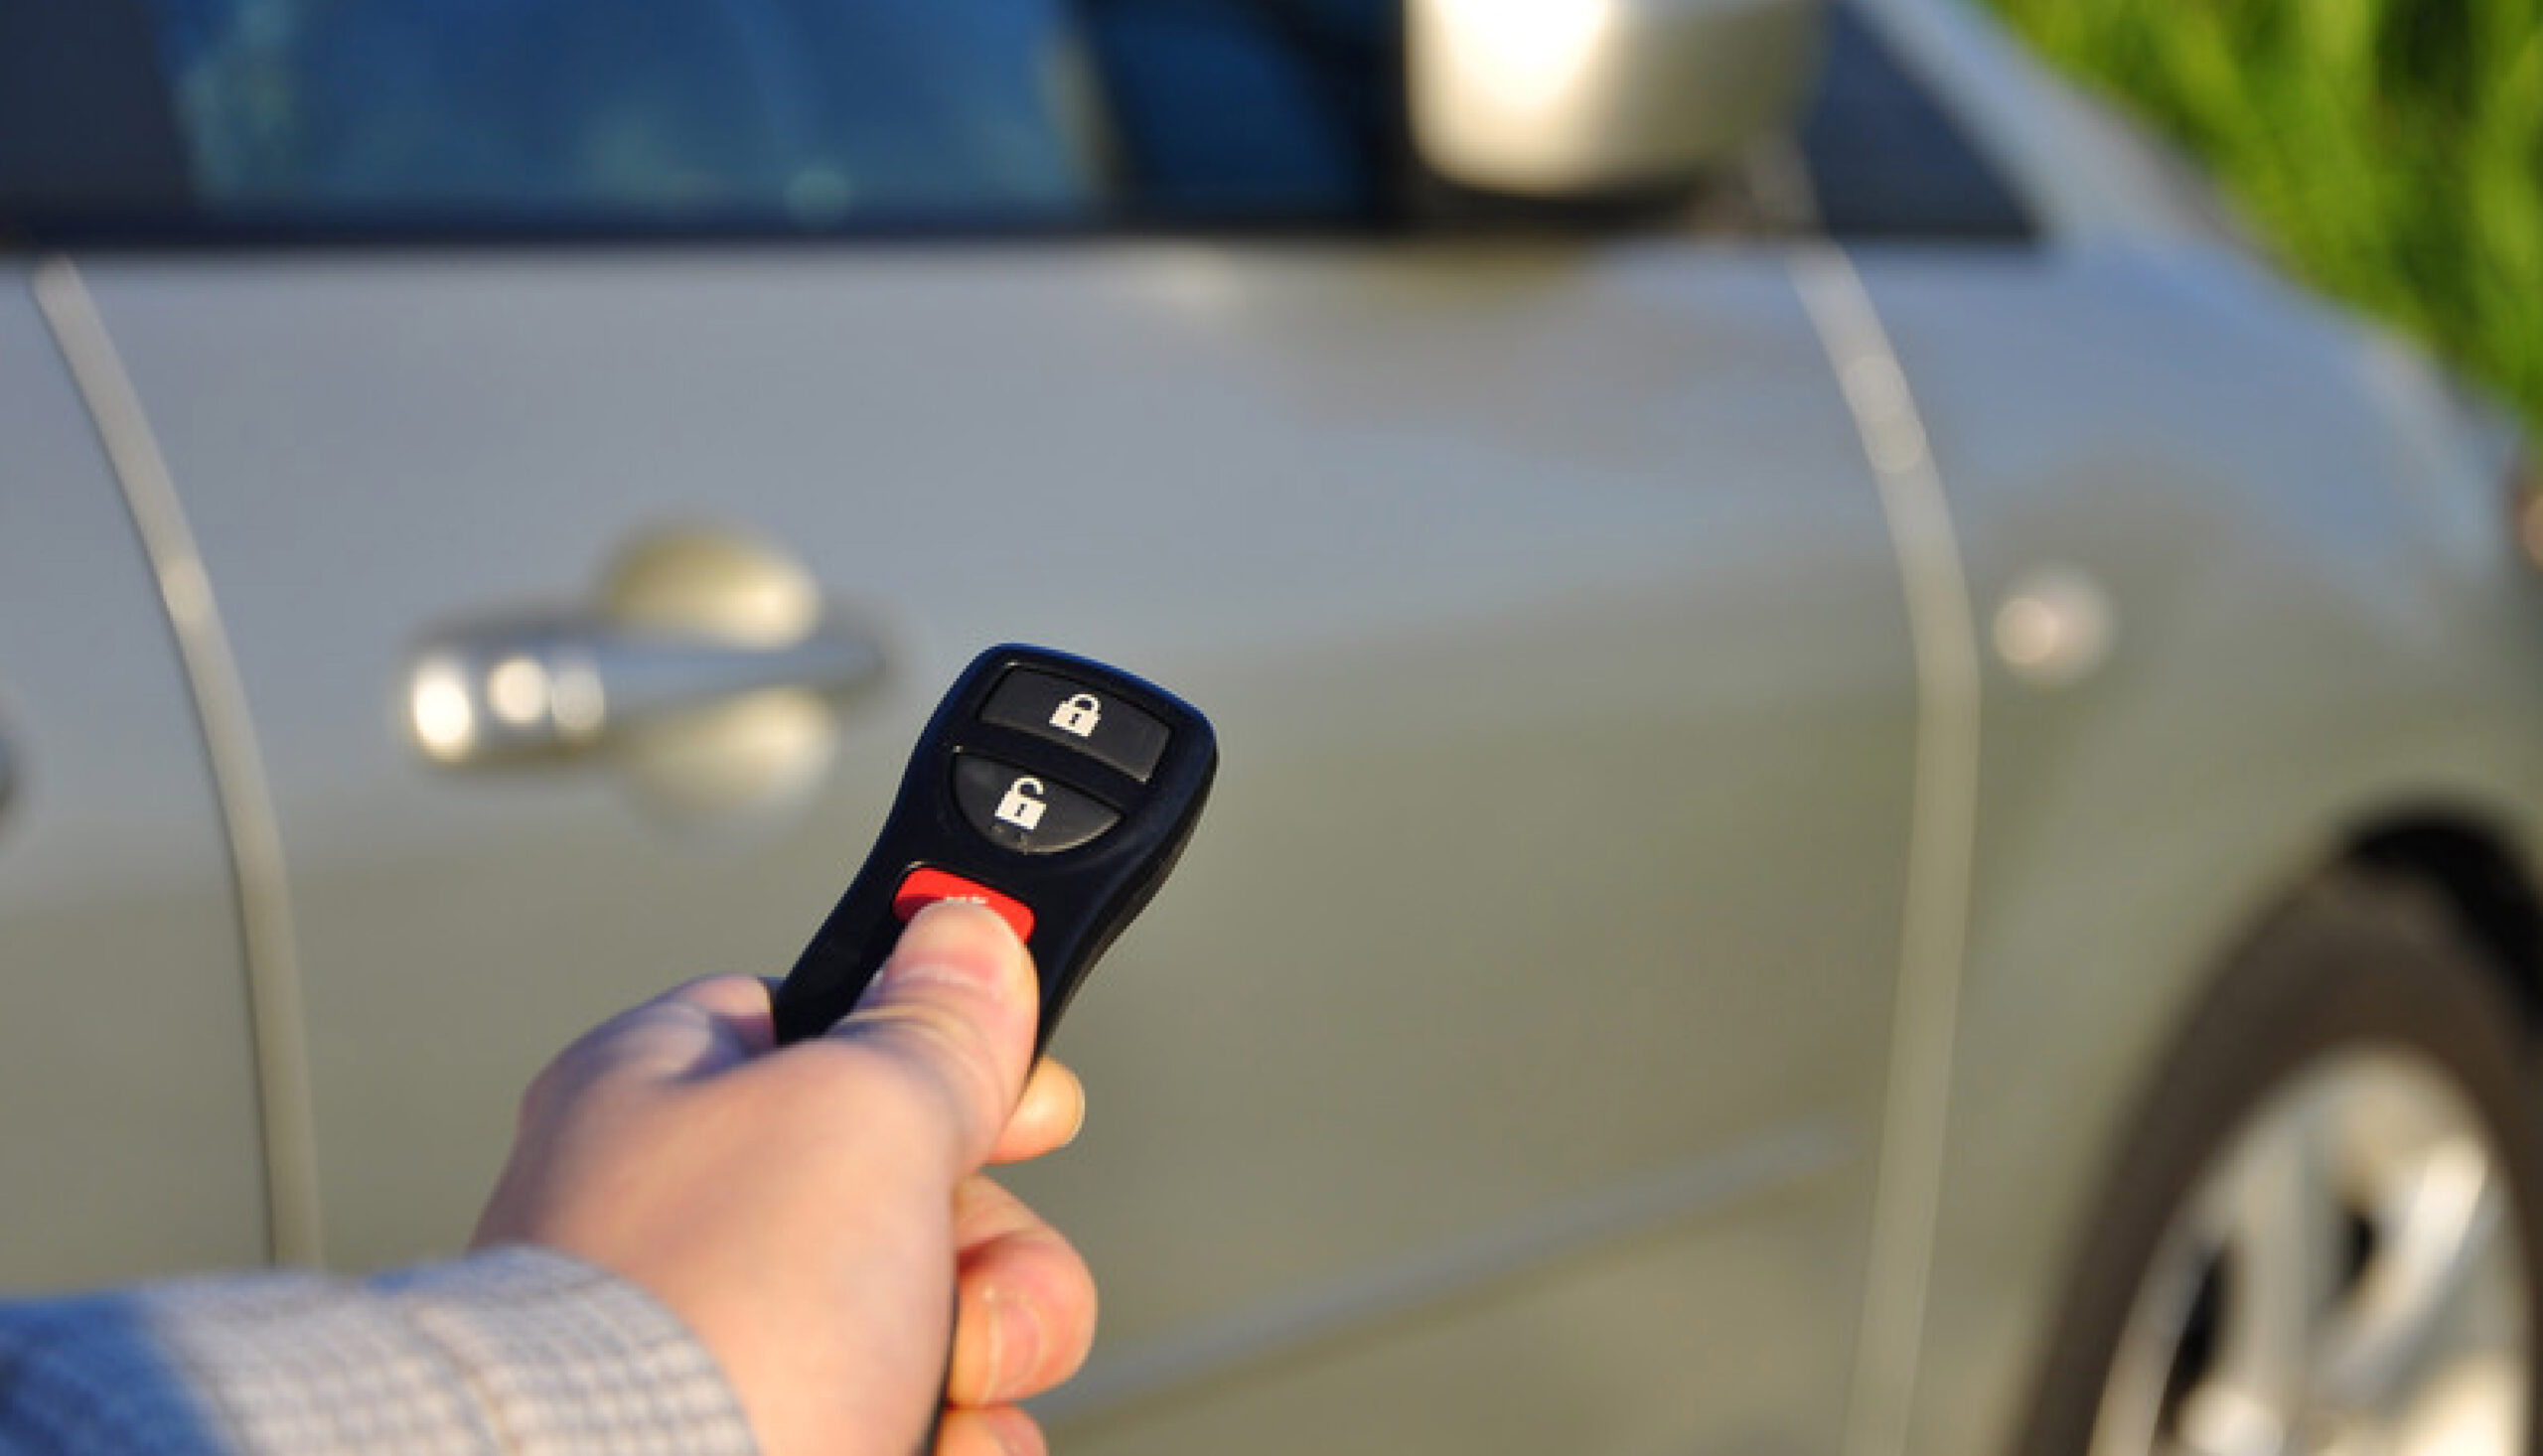 What Is The Operation Of A Car's Anti-Theft Device